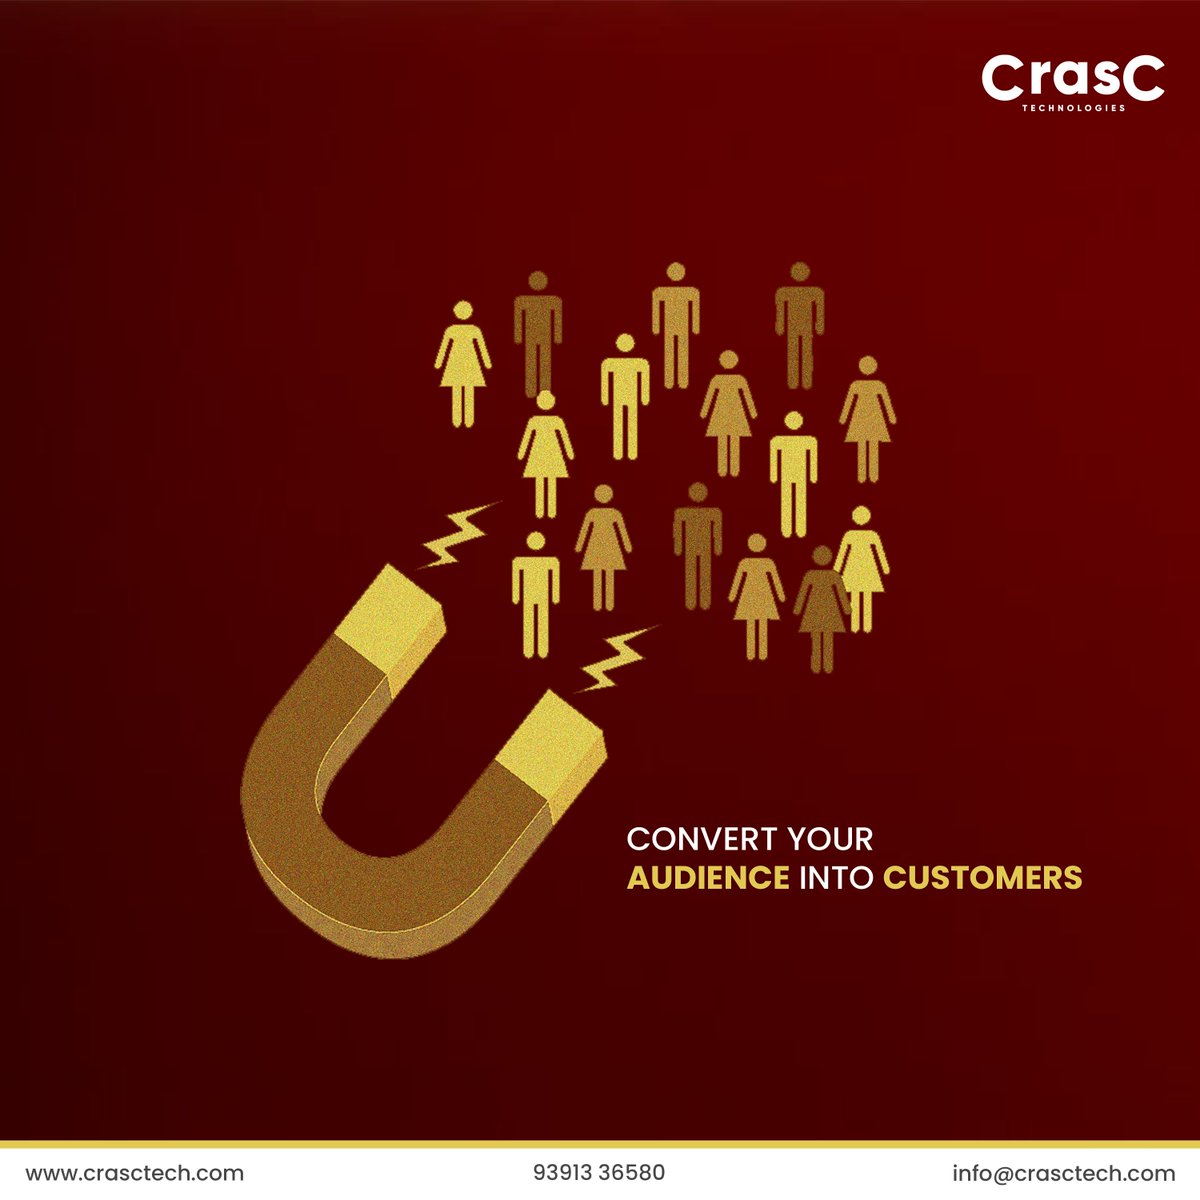 🎯 Transforming potential into profit! Crasctech specializes in converting audiences into loyal customers! 📊 💡 Let's turn your followers into brand advocates! 💼 #crasctech #digitalmarketing #socialmediamarketing #audienceengagement #customers #customersupport #bestagency